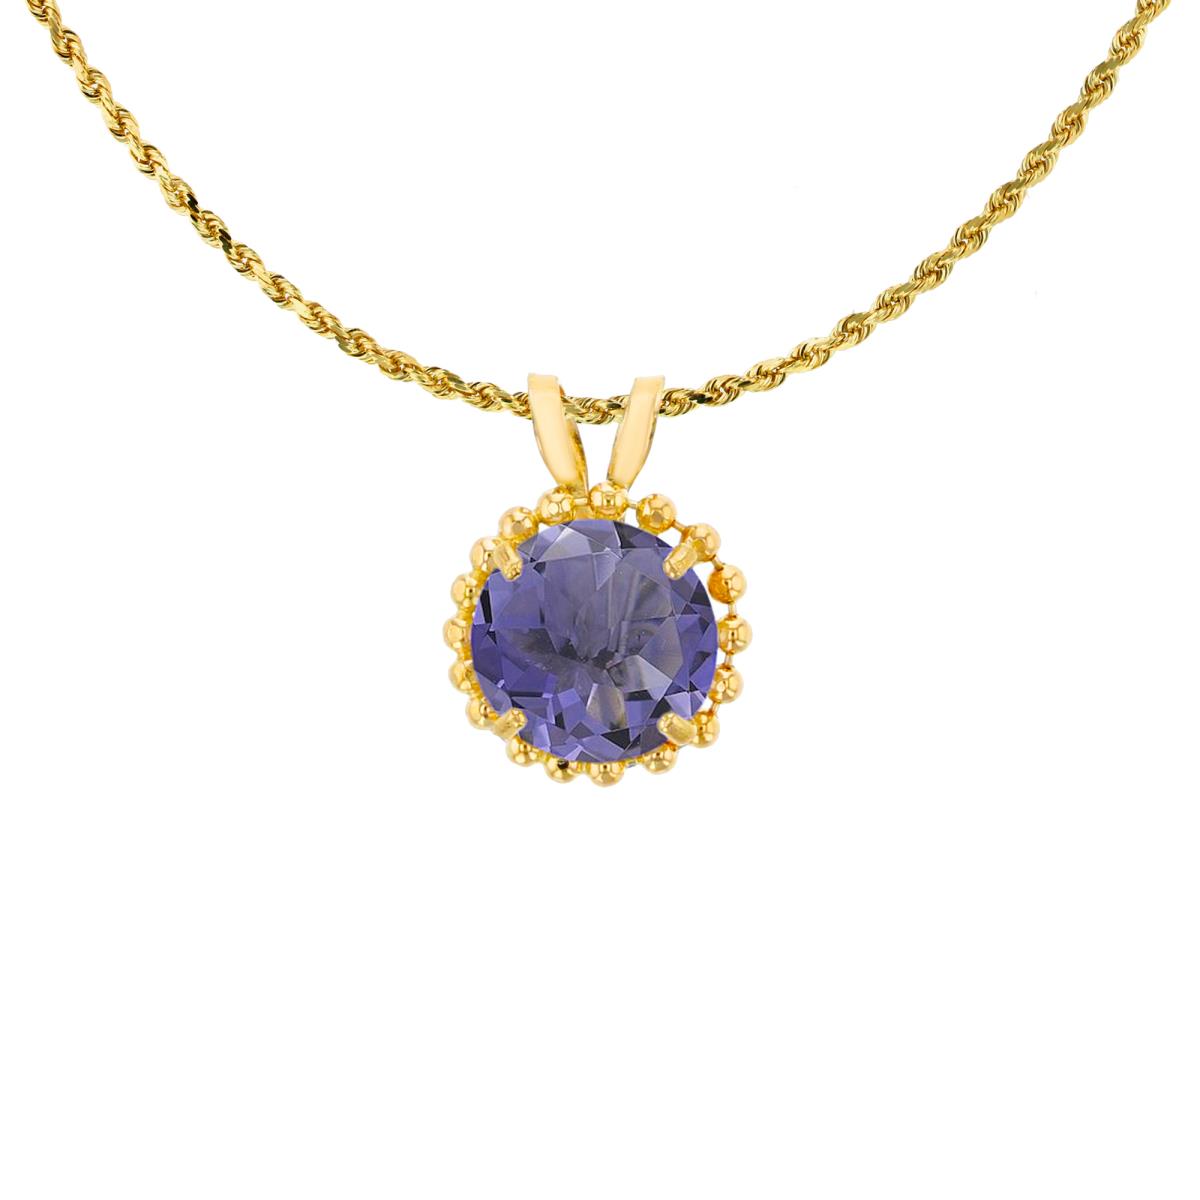 10K Yellow Gold 6mm Rd Cut Iolite with Bead Frame Rabbit Ear 18" Necklace